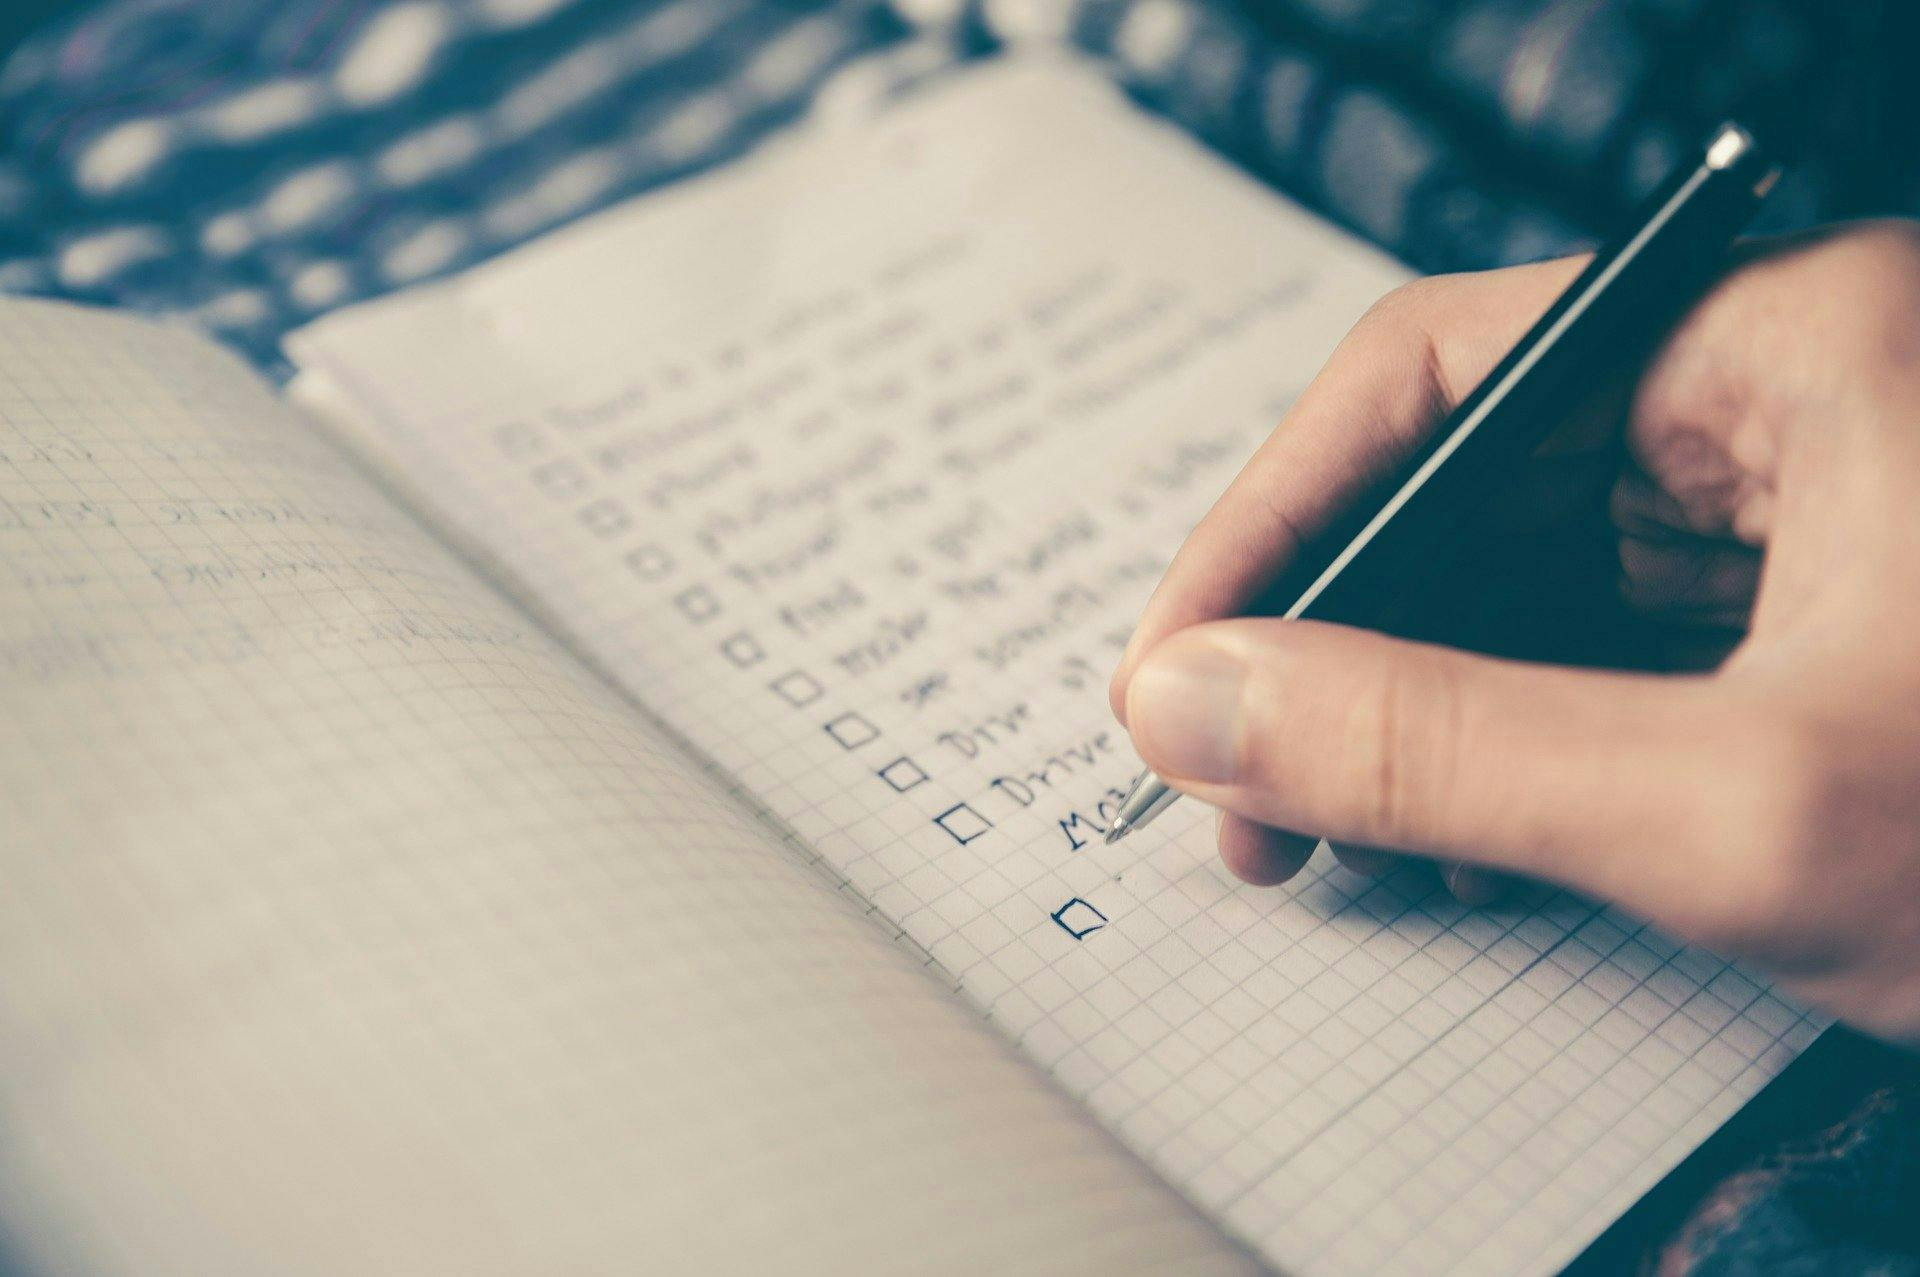 A hand writes a checklist in a grid-style notebook, beside an open second notebook on a patterned surface.